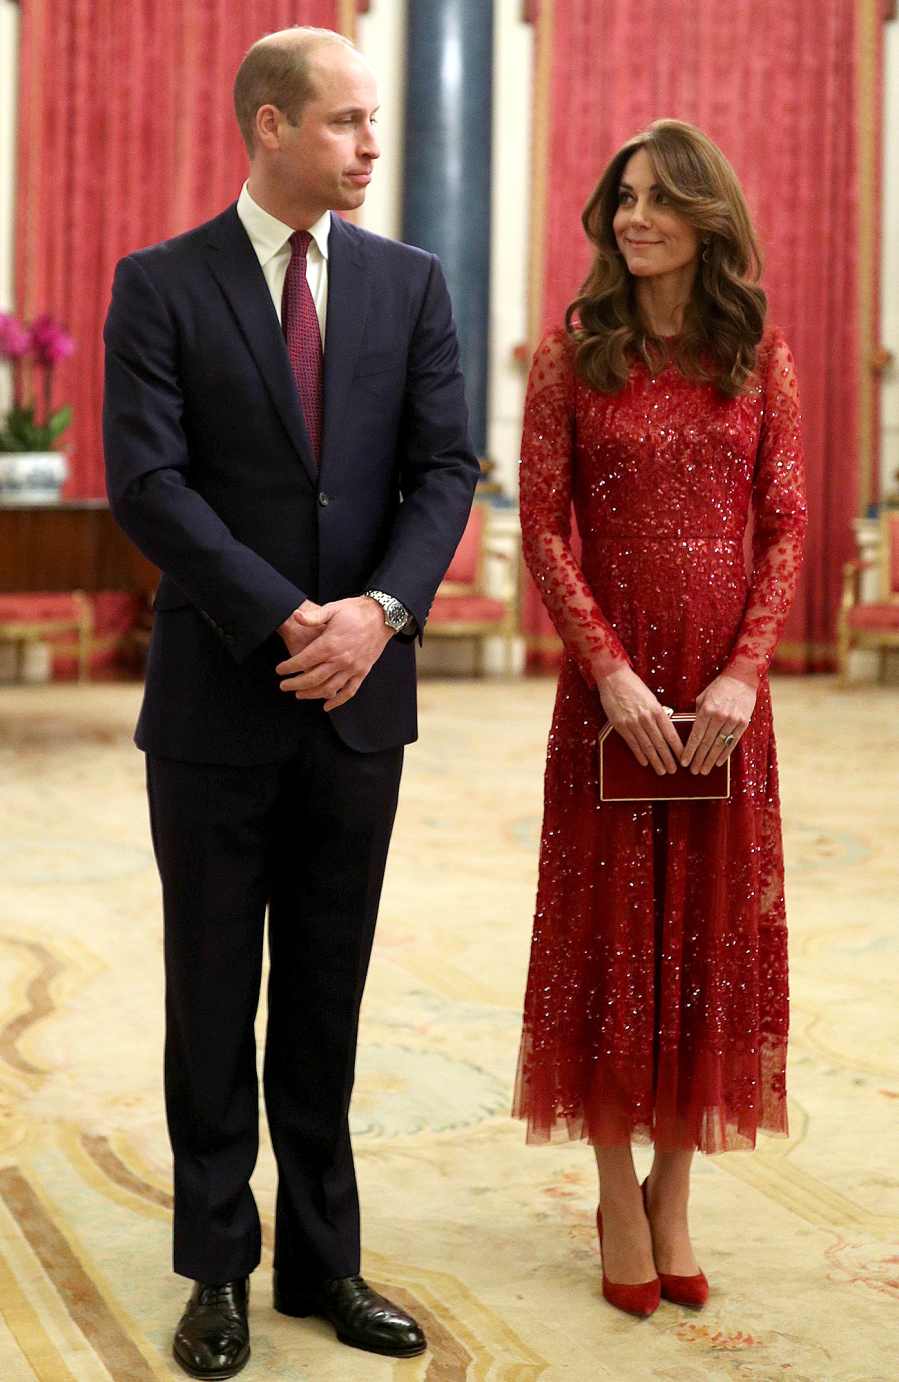 Prince-William-and-Duchess-Kate-Smile-and-Laugh-at-Buckingham-Palace-Event-1